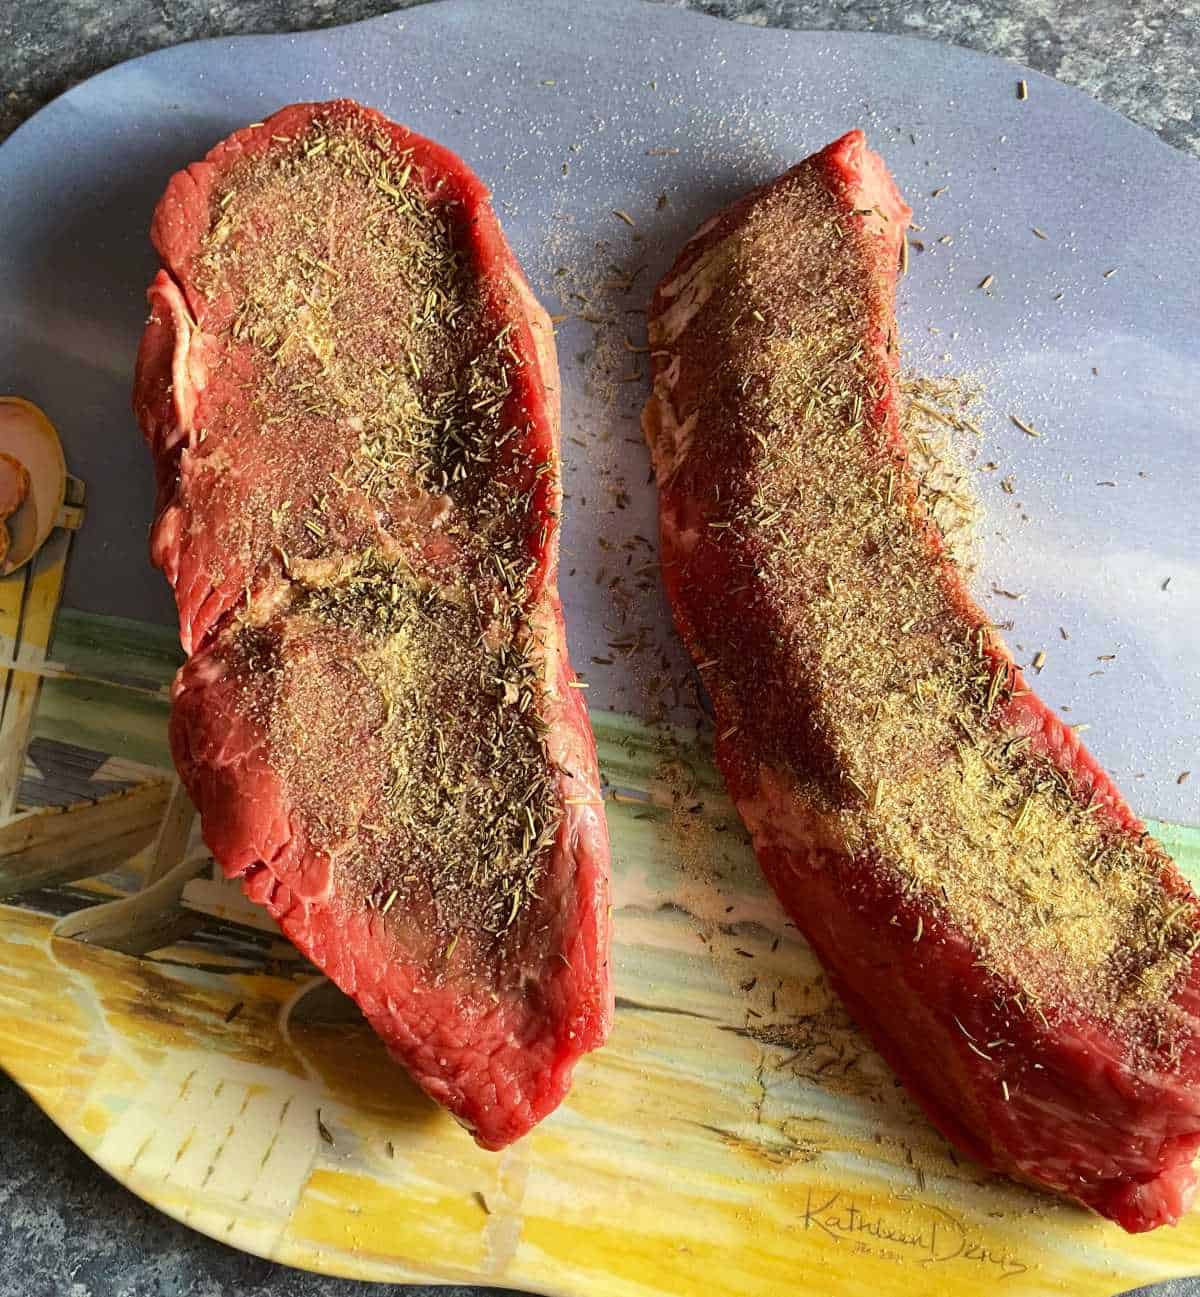 two raw sirloin steaks with dried spice rub on a platter, ready for grilling.